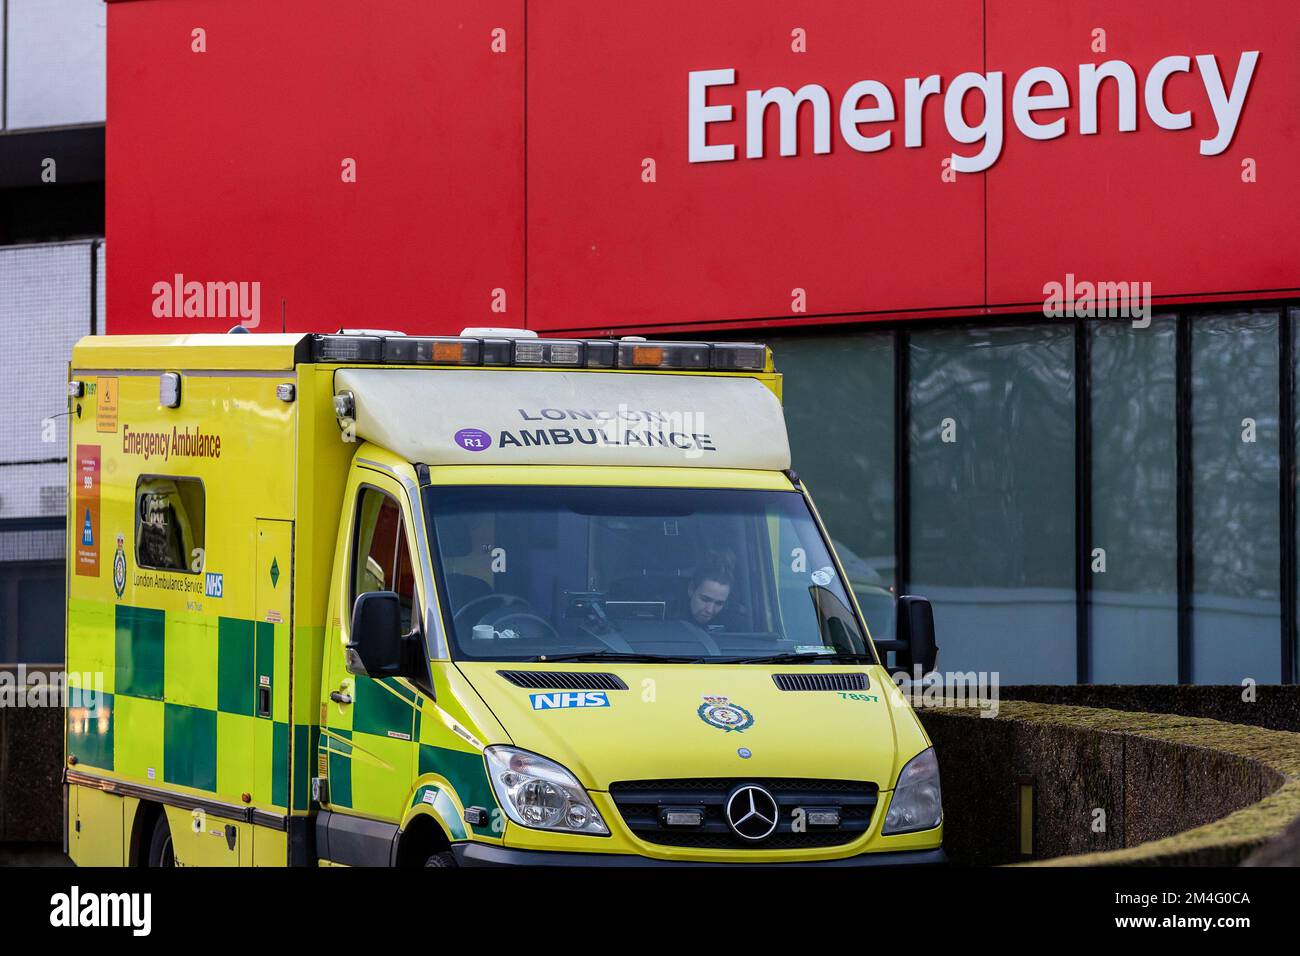 The paramedic will see you now: home visits by ambulance staff lighten GPs'  load, NHS